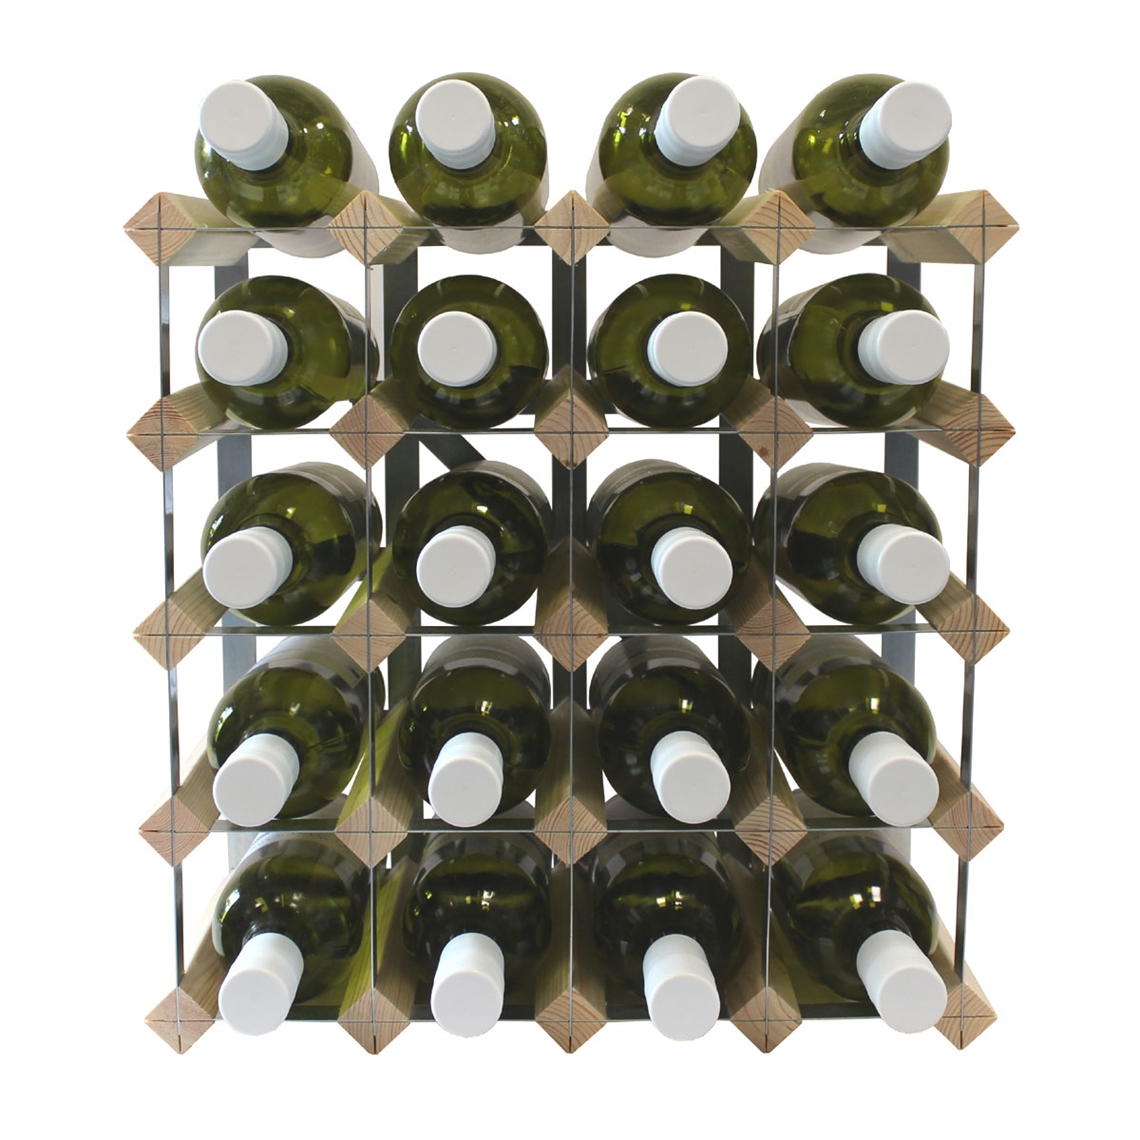 View more wooden wine cabinets from our Assembled Wine Racks range